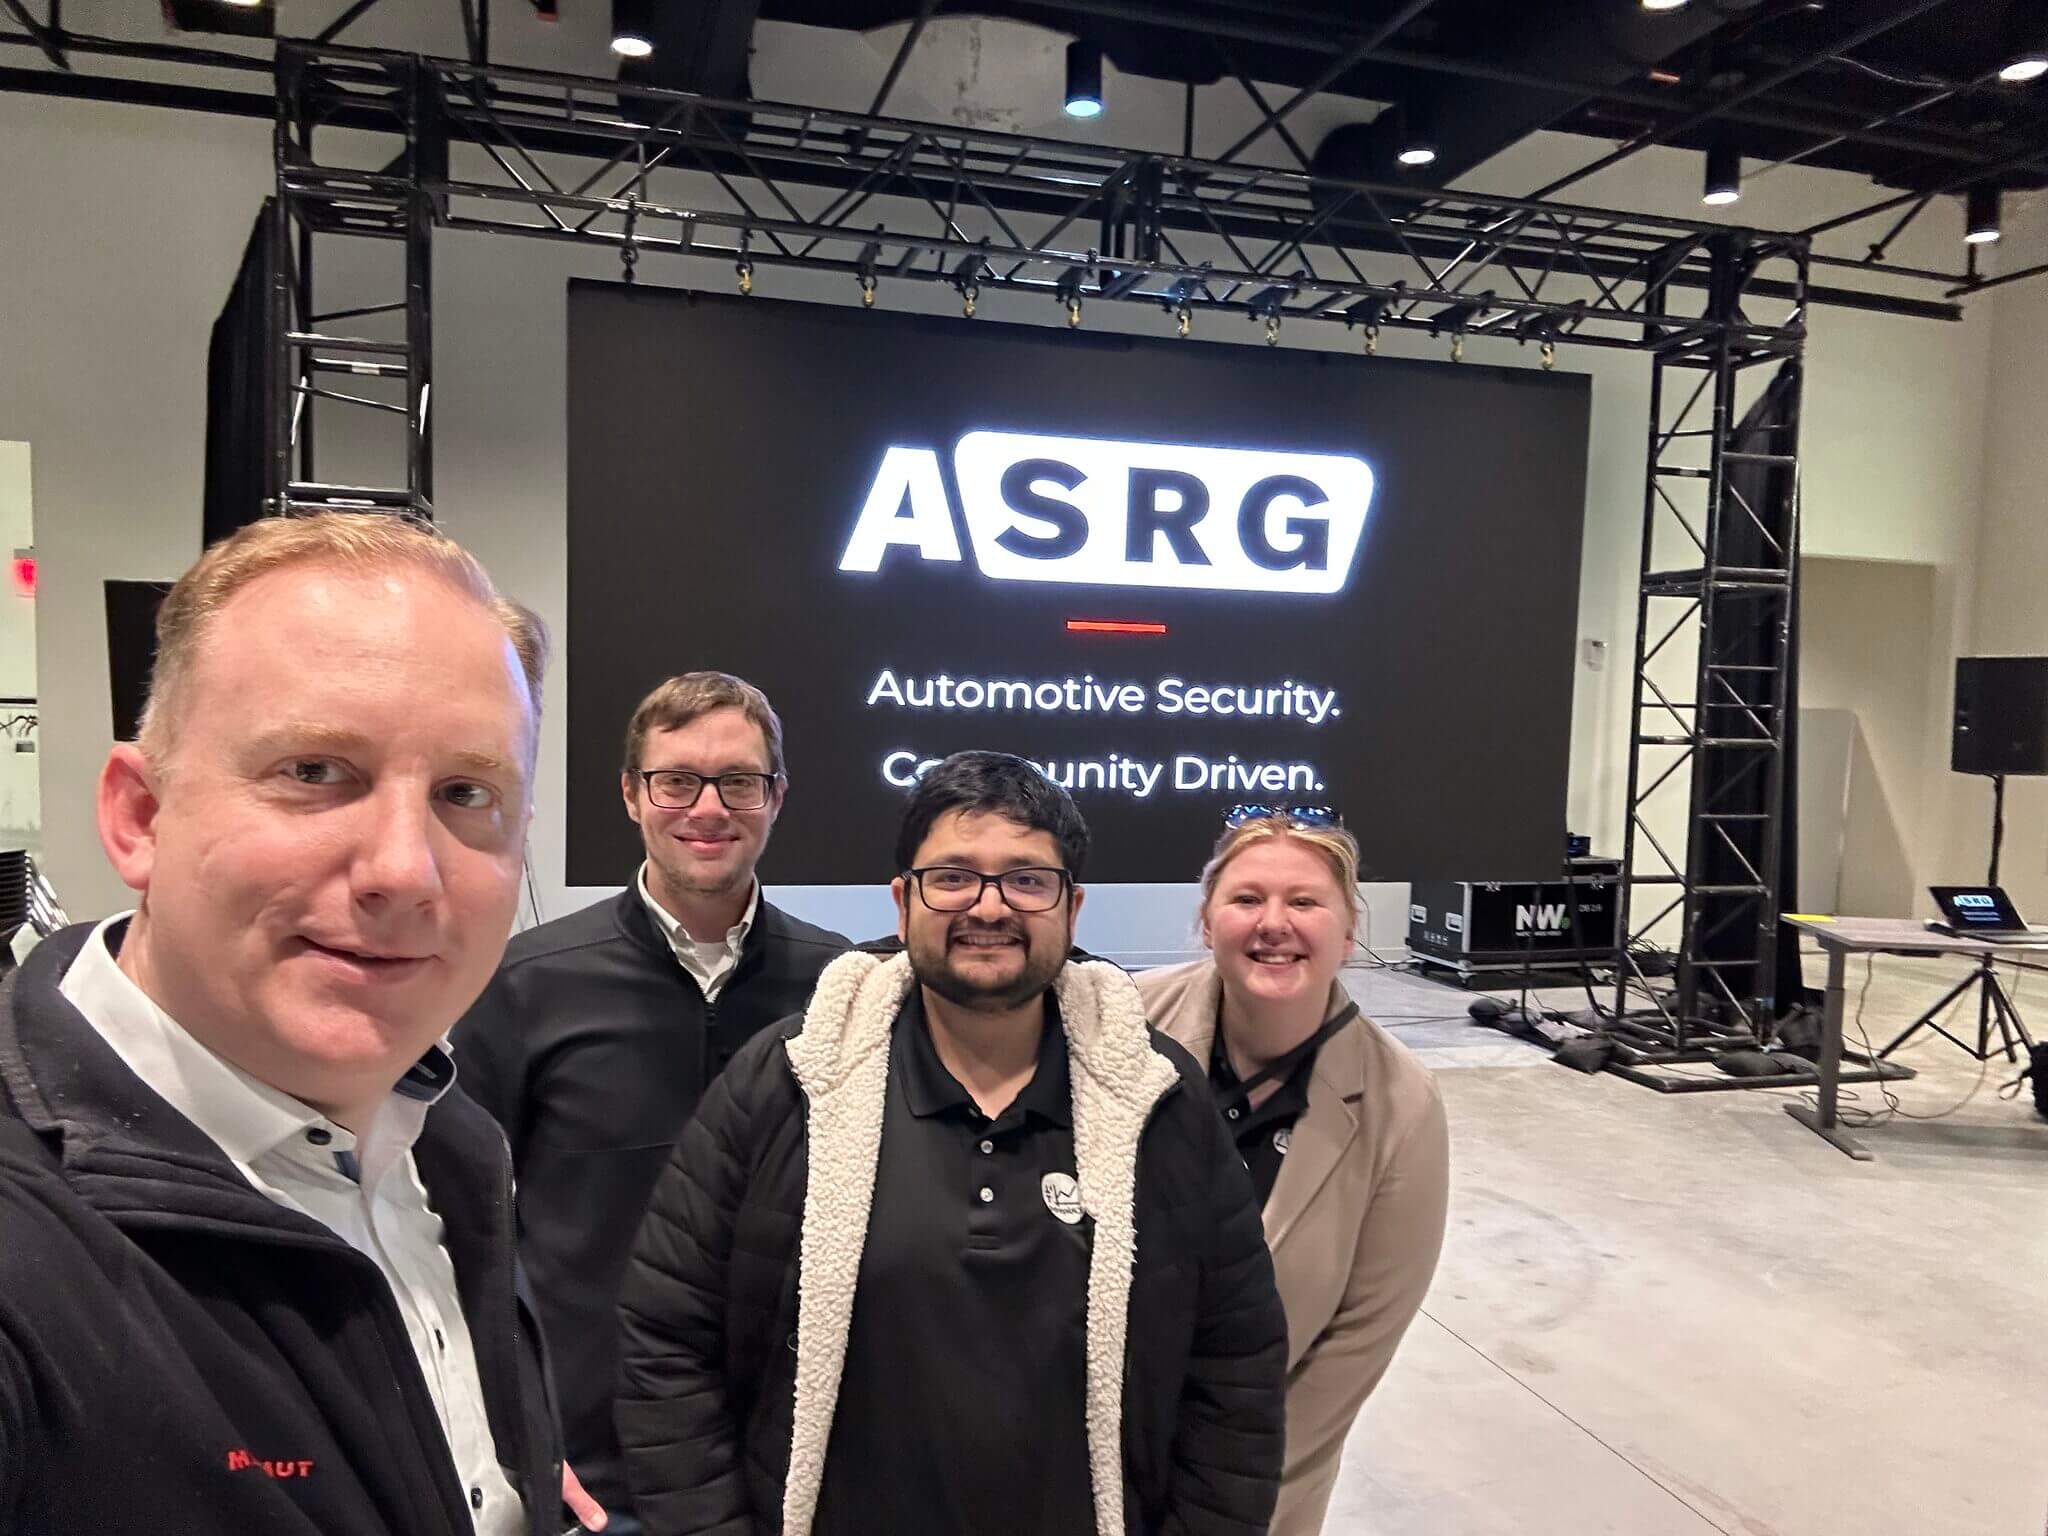 Intrepid’s team attended hackathon hosted by ASRG and the Detroit NewLab